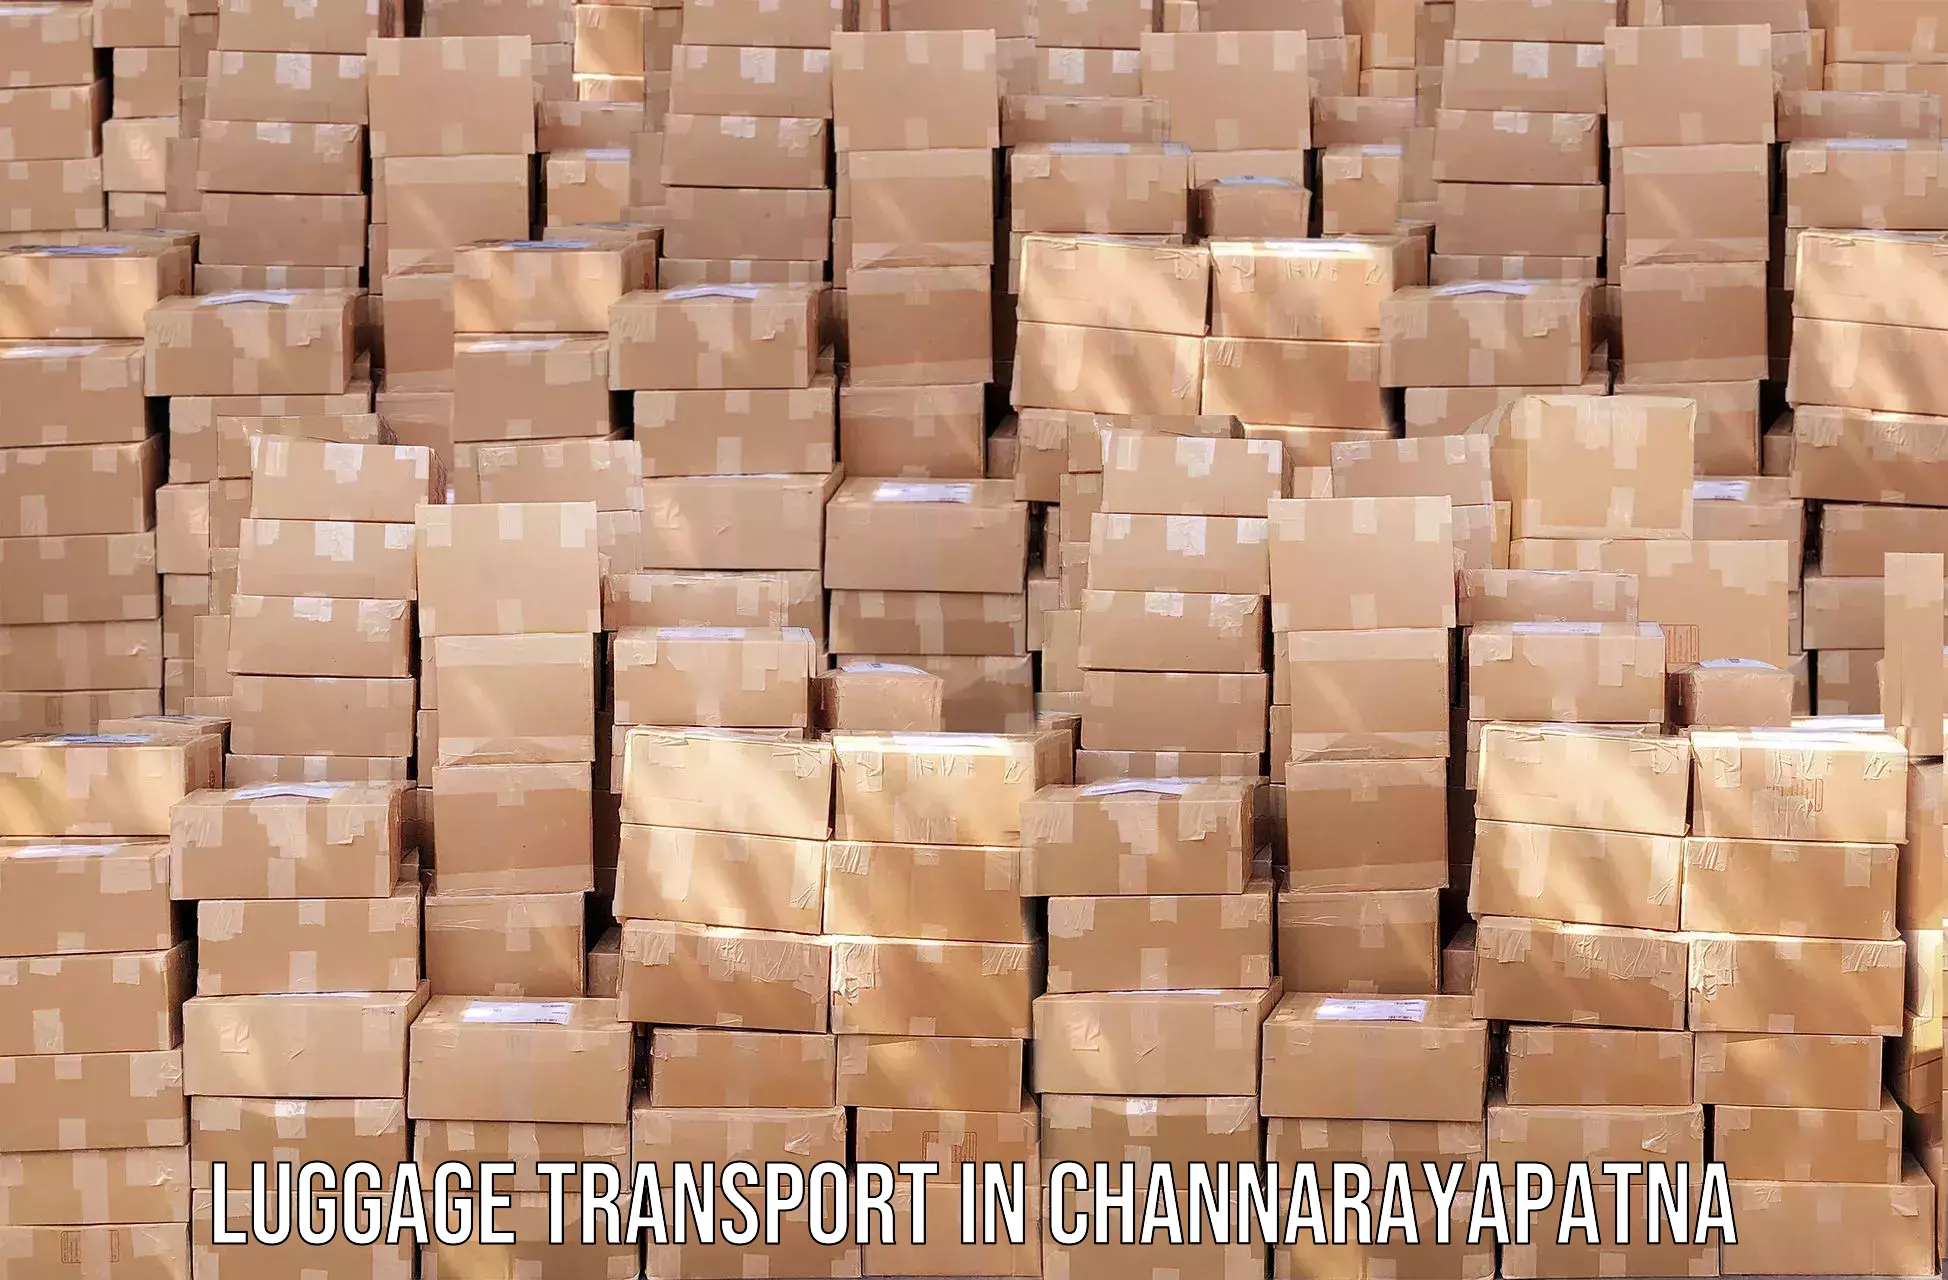 Luggage storage and delivery in Channarayapatna